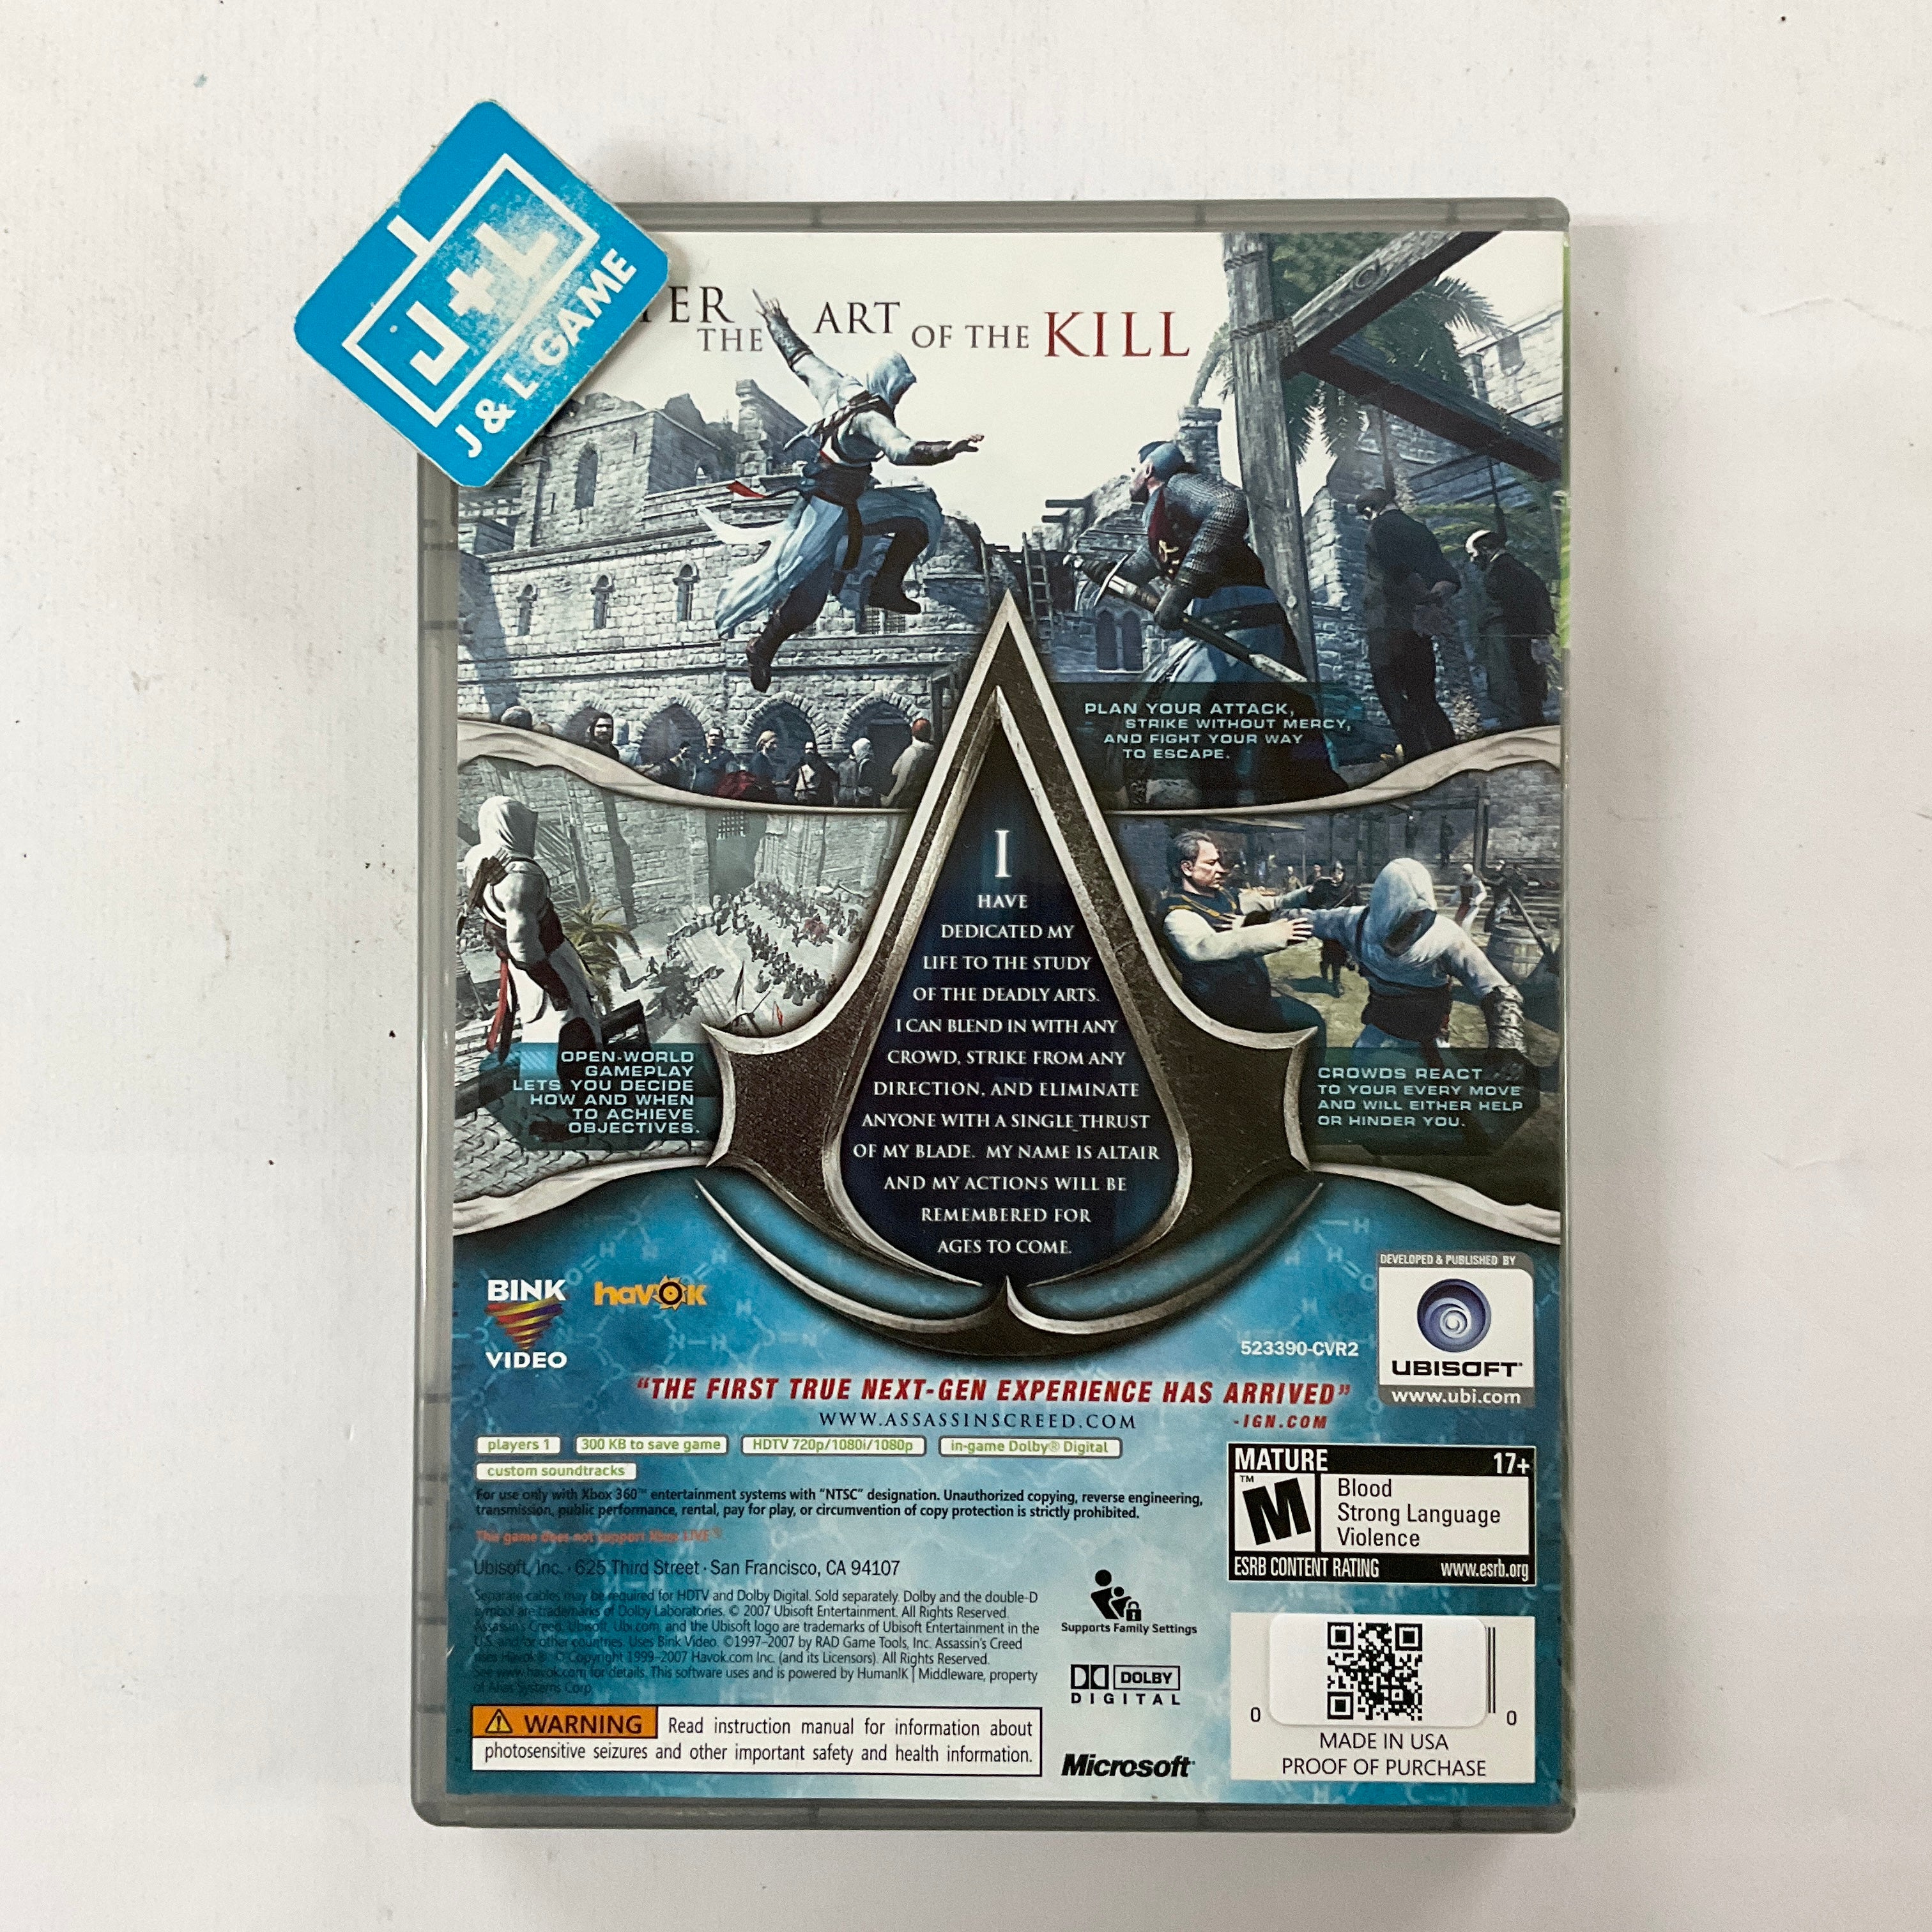 Assassin's Creed (Platinum Hits) - Xbox 360 [Pre-Owned] Video Games Ubisoft   